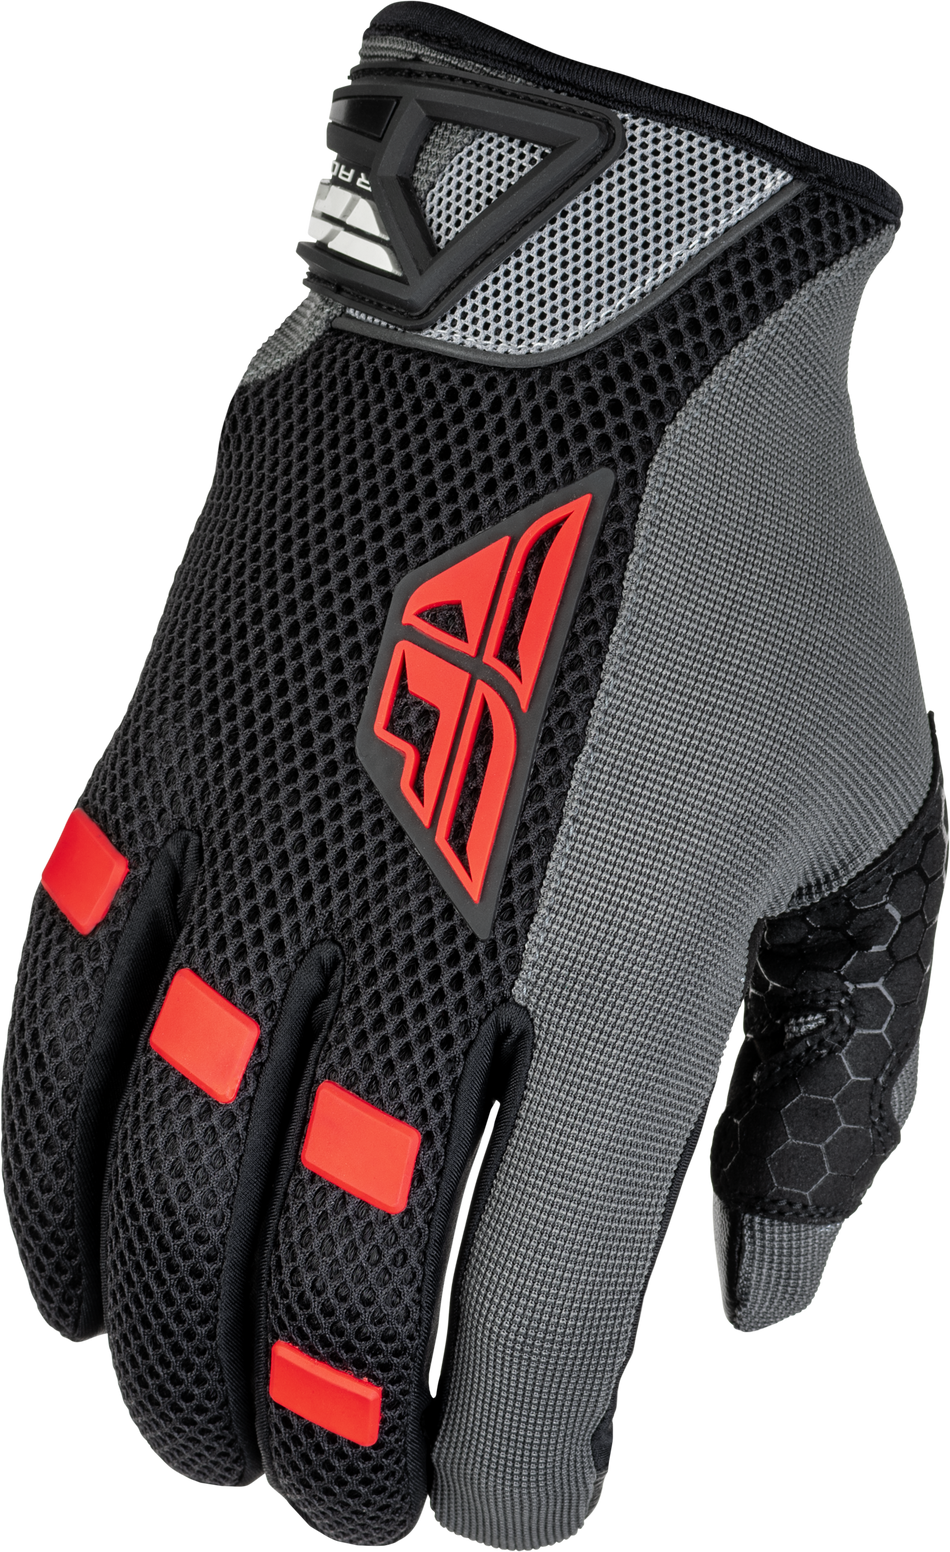 FLY RACING Coolpro Gloves Black/Red Md 476-4026M